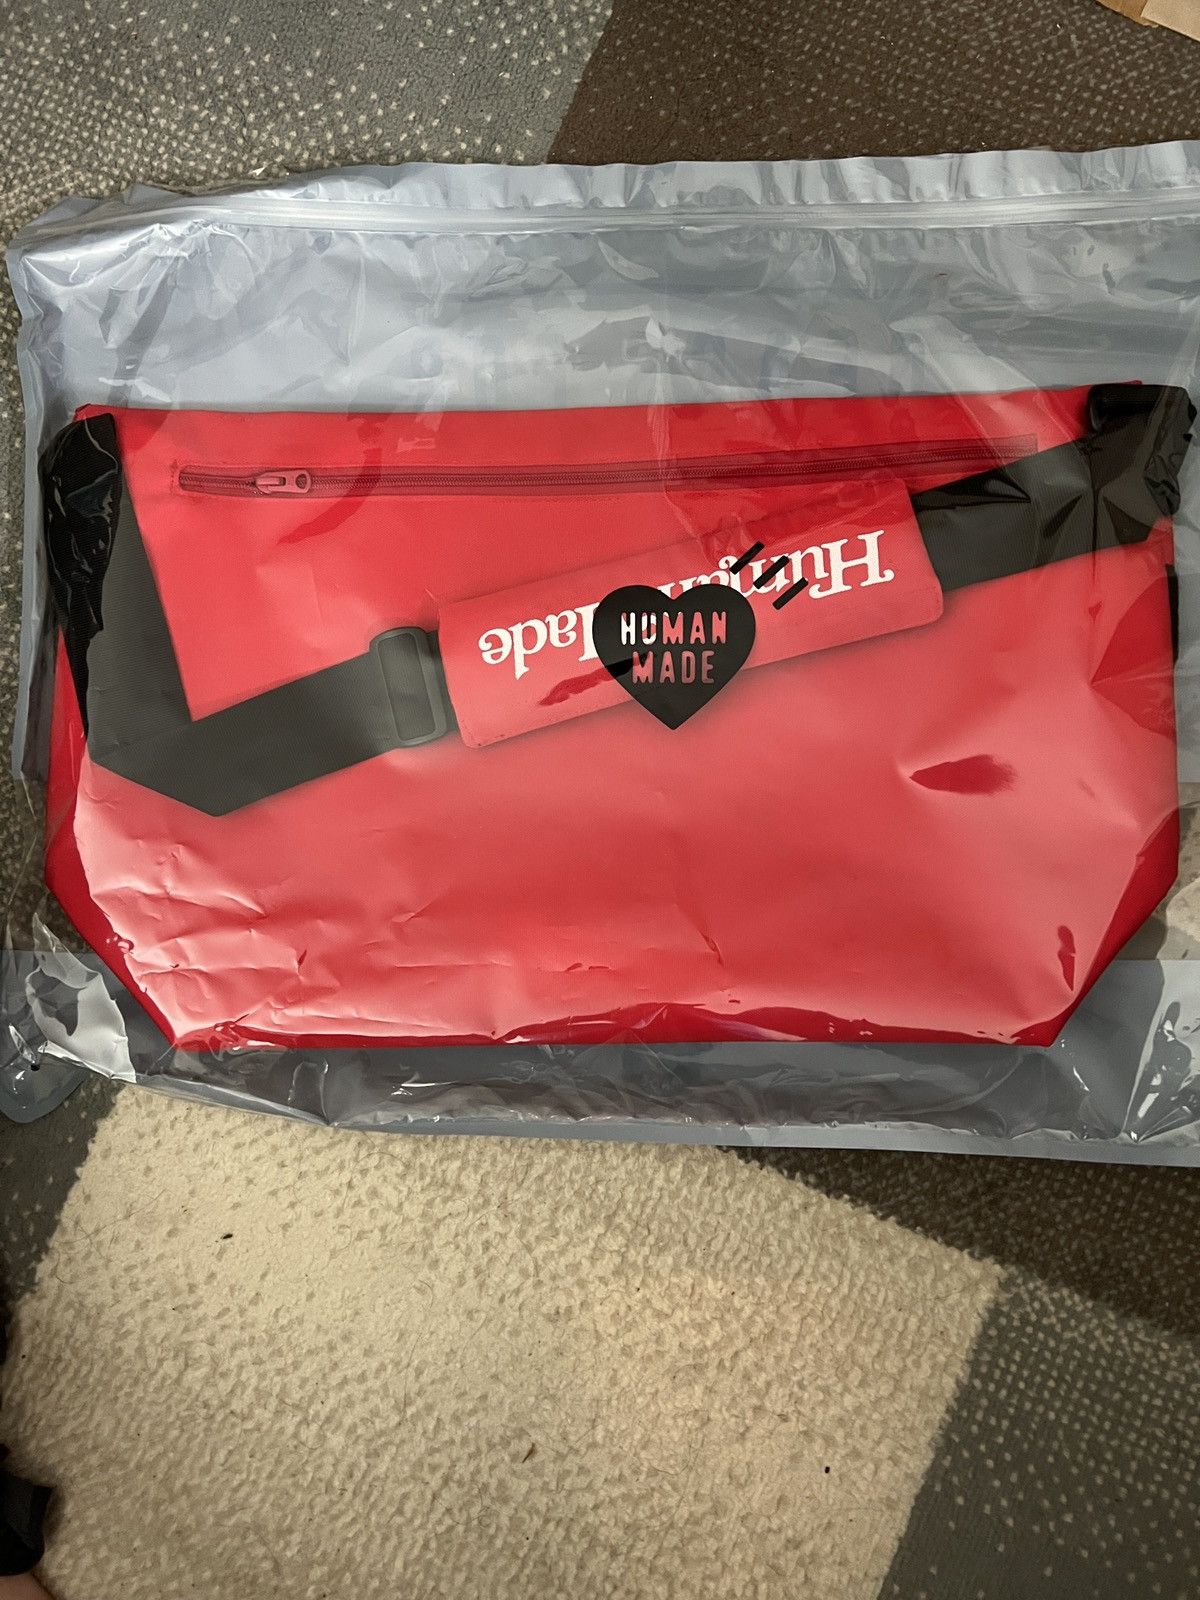 Human Made NEW Human made × BMW × Girls don't cry MESSENGER BAG red |  Grailed